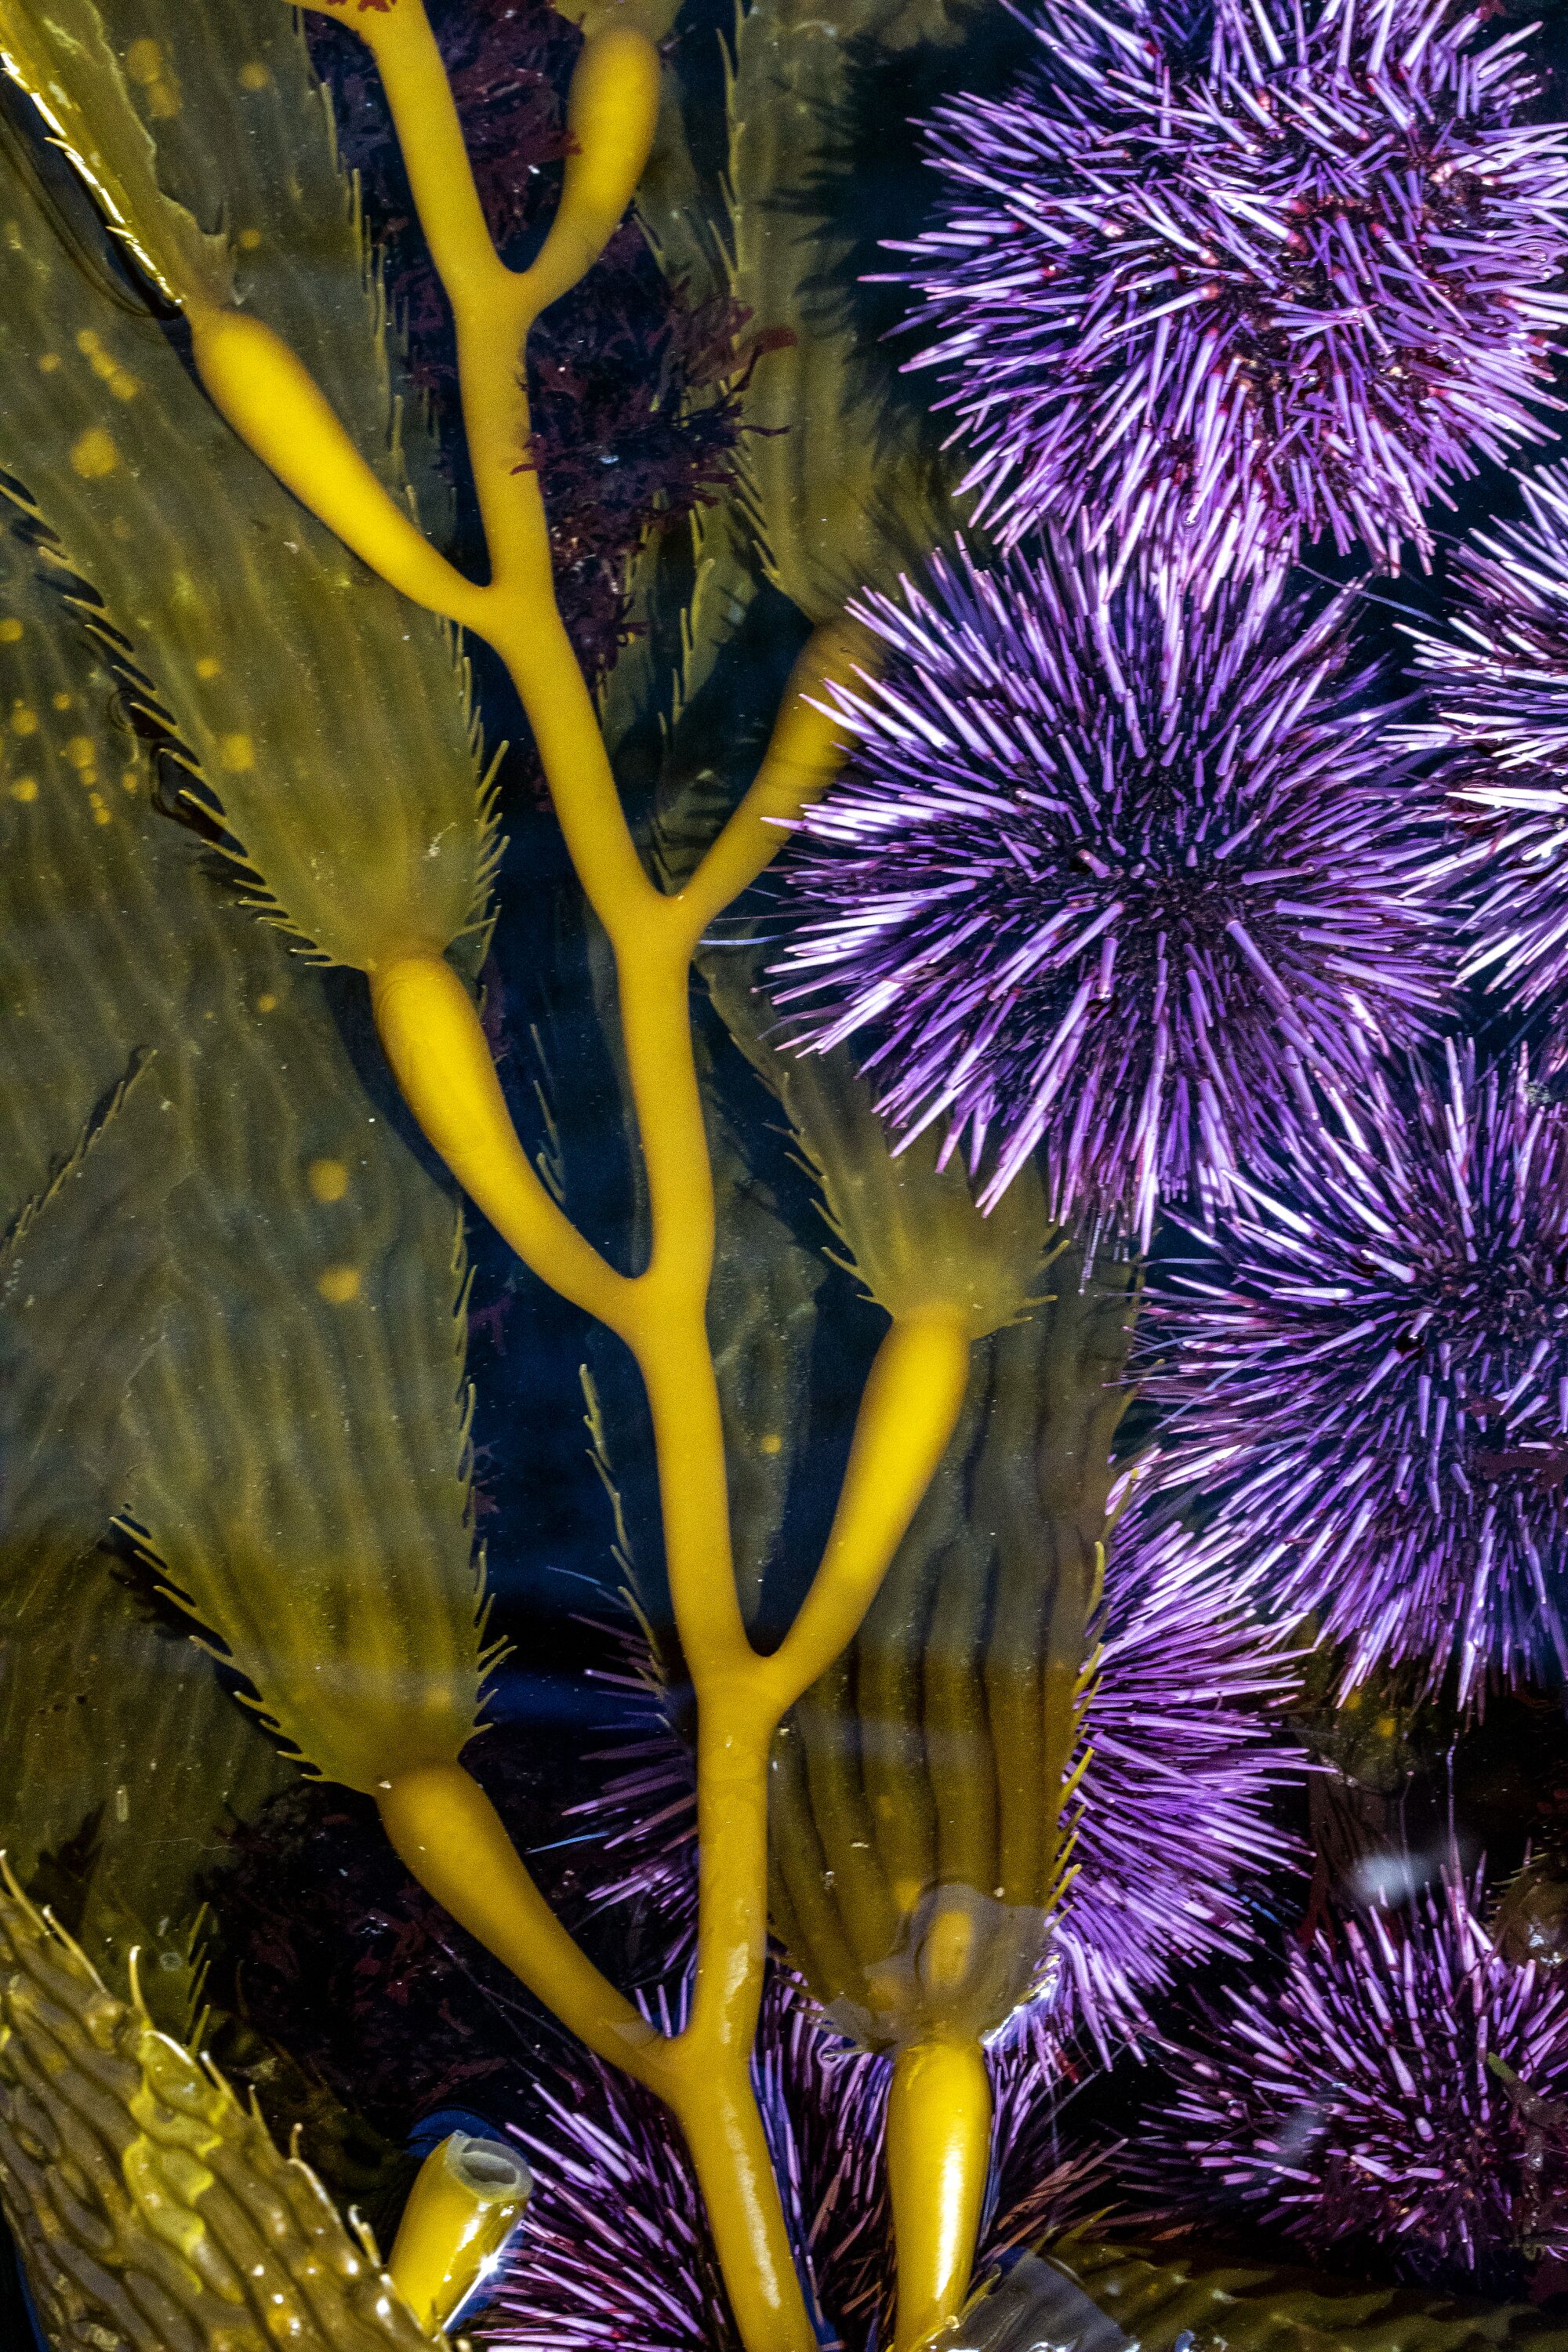 Purple urchins next to a vine of seaweed 